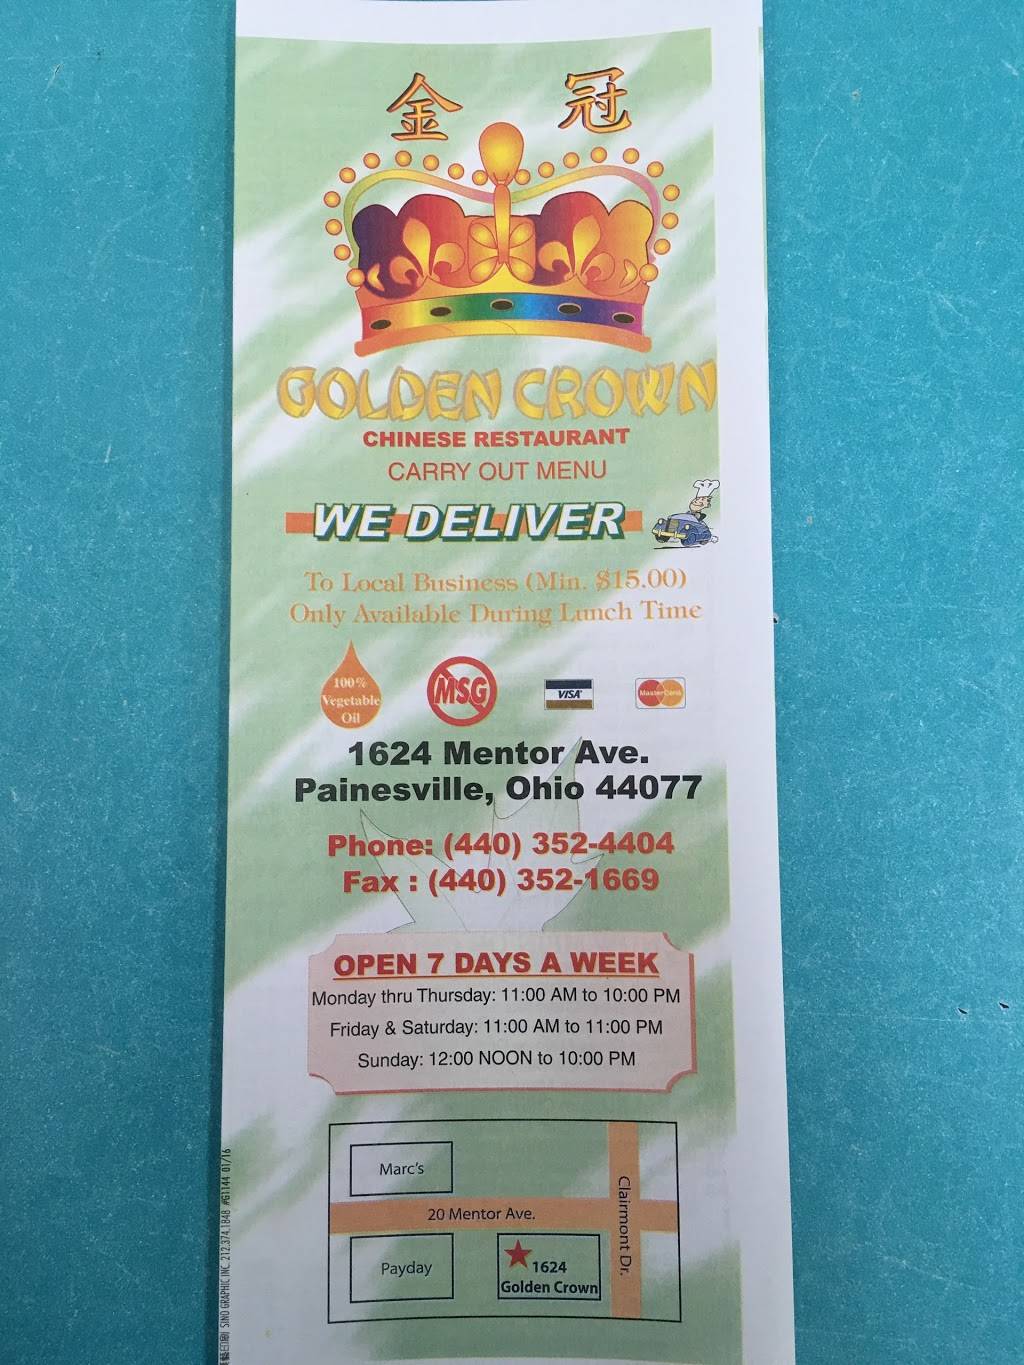 Golden Crown Chinese Restaurant | restaurant | 1624 Mentor Ave, Painesville, OH 44077, USA | 4403524404 OR +1 440-352-4404